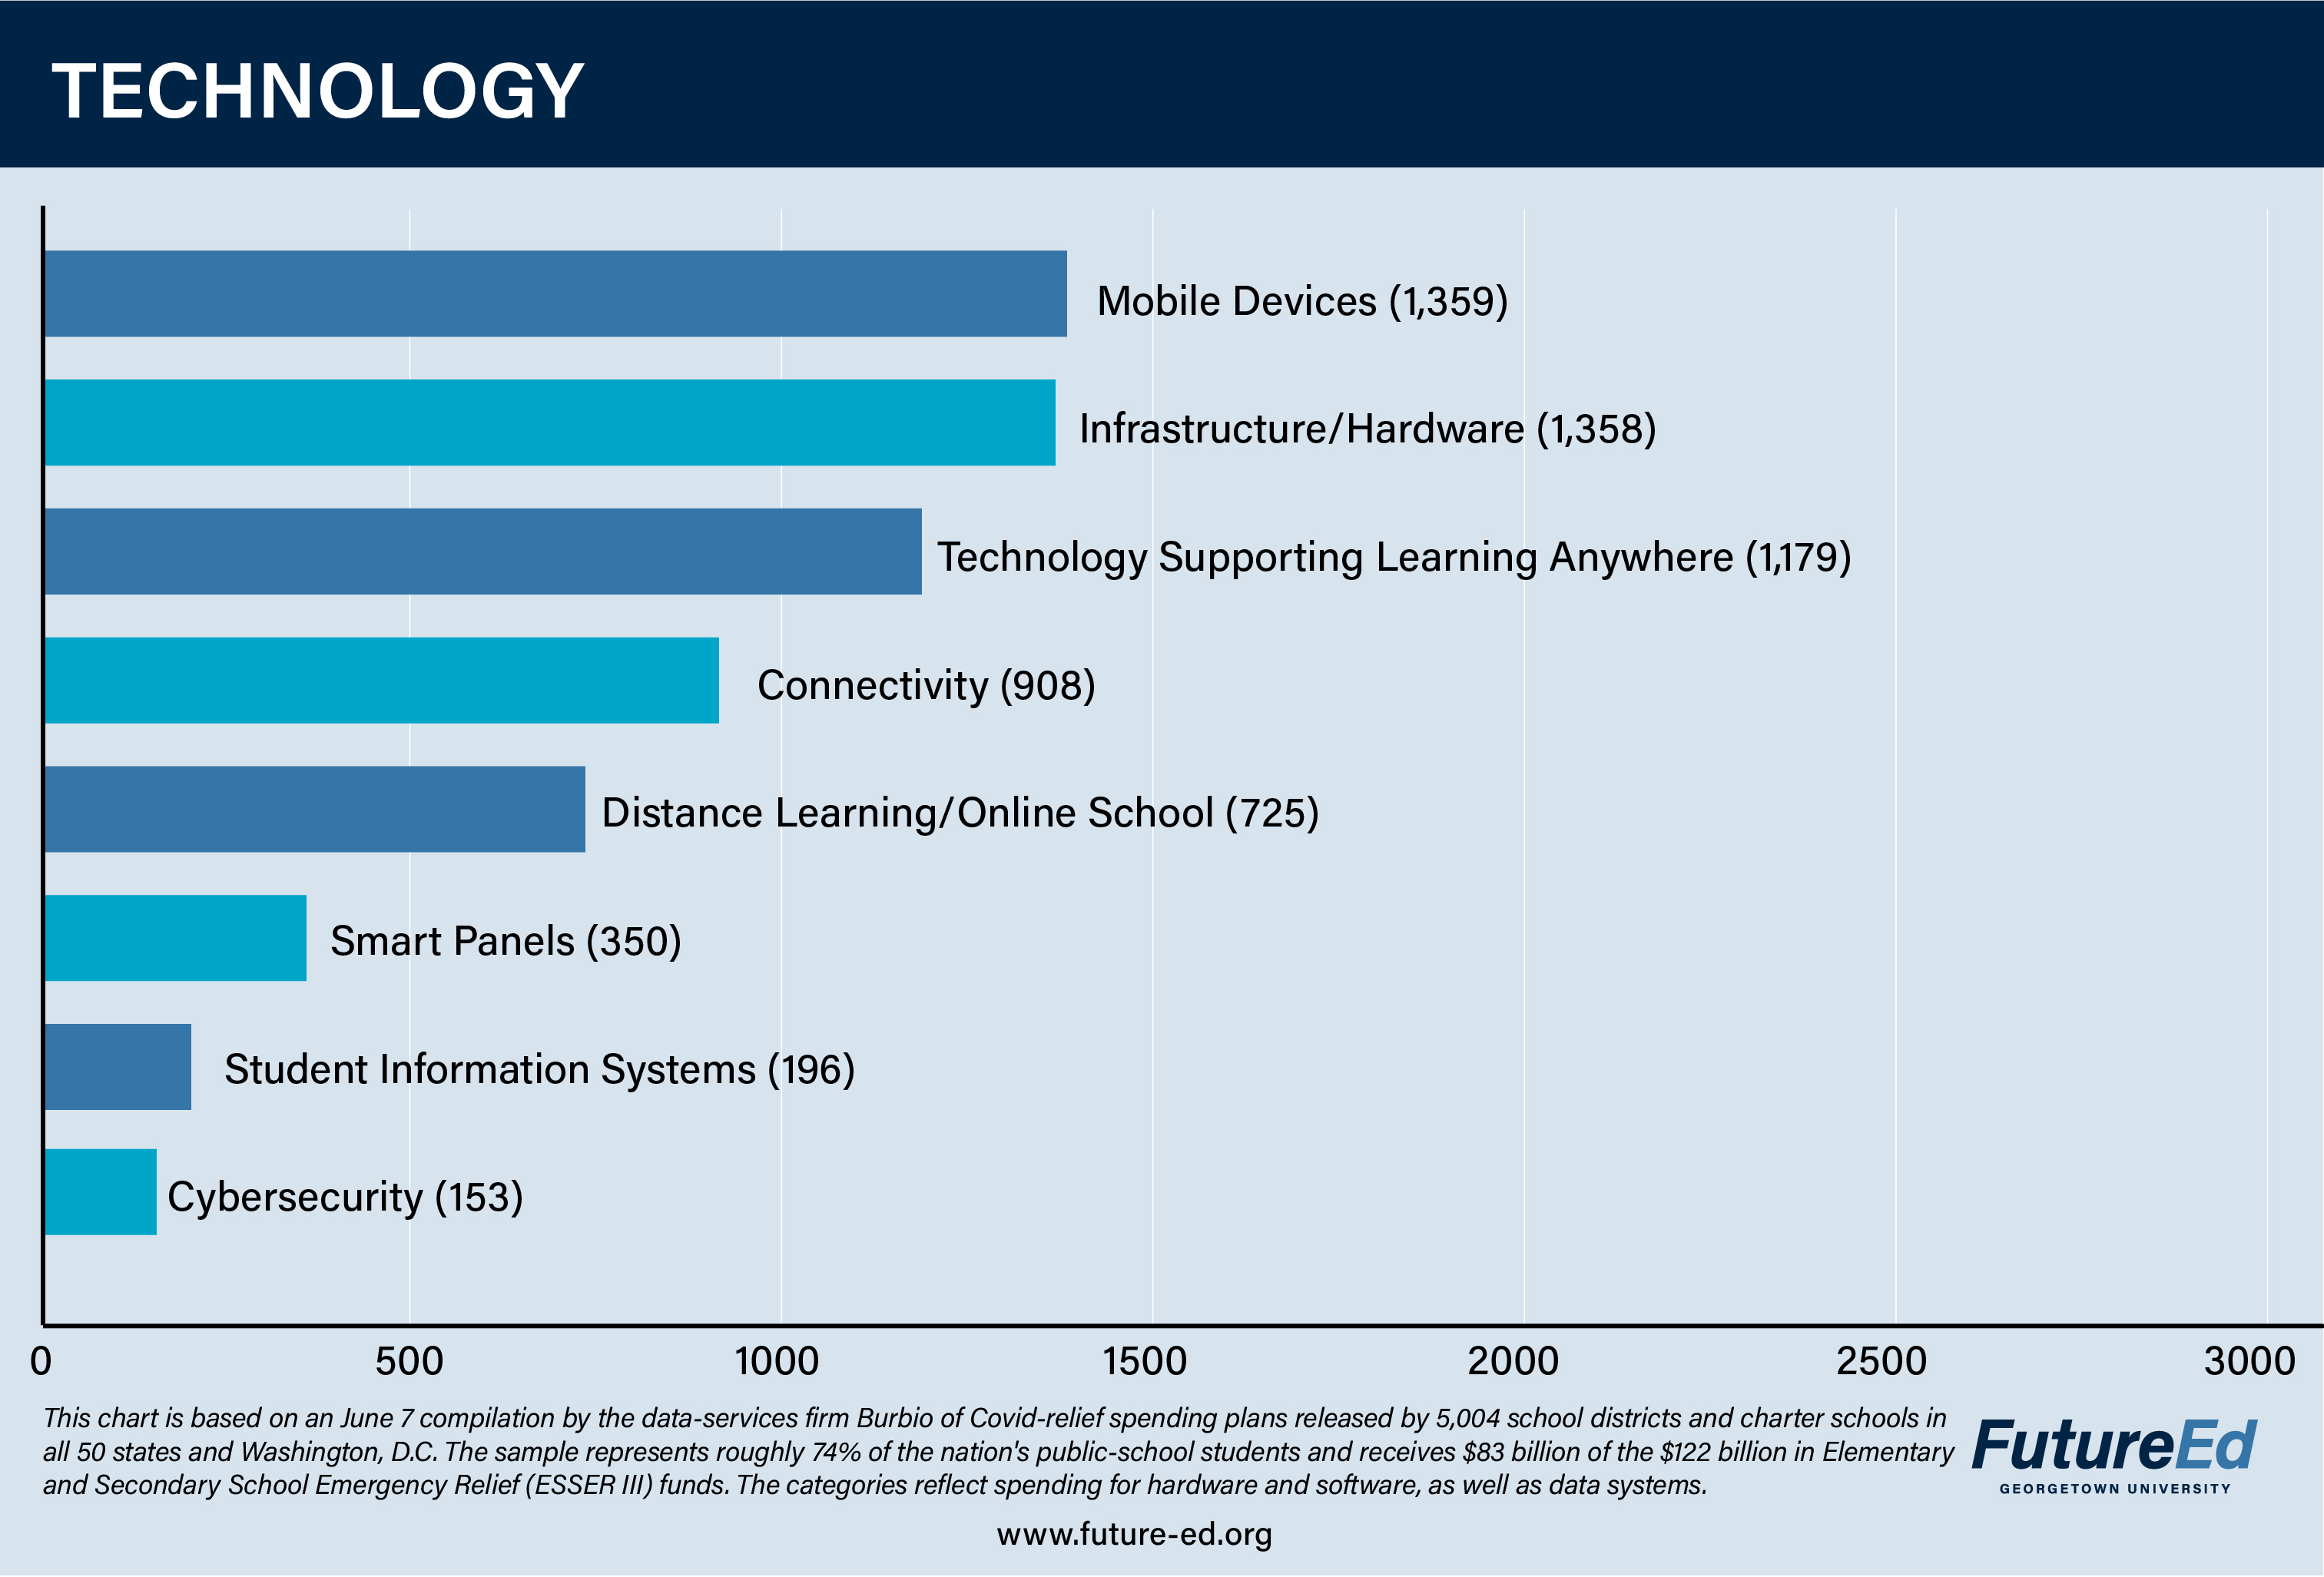 Chart: Technology. Mobile devices: 1,359. Infrastructure/hardware: 1,358. Technology supporting learning anywhere: 1,179. Connectivity: 908. Distance learning/online school: 725. Smart panels: 350. Student information systems: 196. Cybersecurity: 153. (This chart is based on a June 7 compilation by the data-services firm Burbio of Covid-relief spending plans released by 5,004 school districts and charter schools in all 50 states and Washington, D.C. The sample represents roughly 74% of the nation's public-school students and receives $83 billion of the $122 billion in Elementary and Secondary School Emergency Relief (ESSER III) funds. The categories reflect spending for hardware and software, as well as data systems.) Links to technology page. 